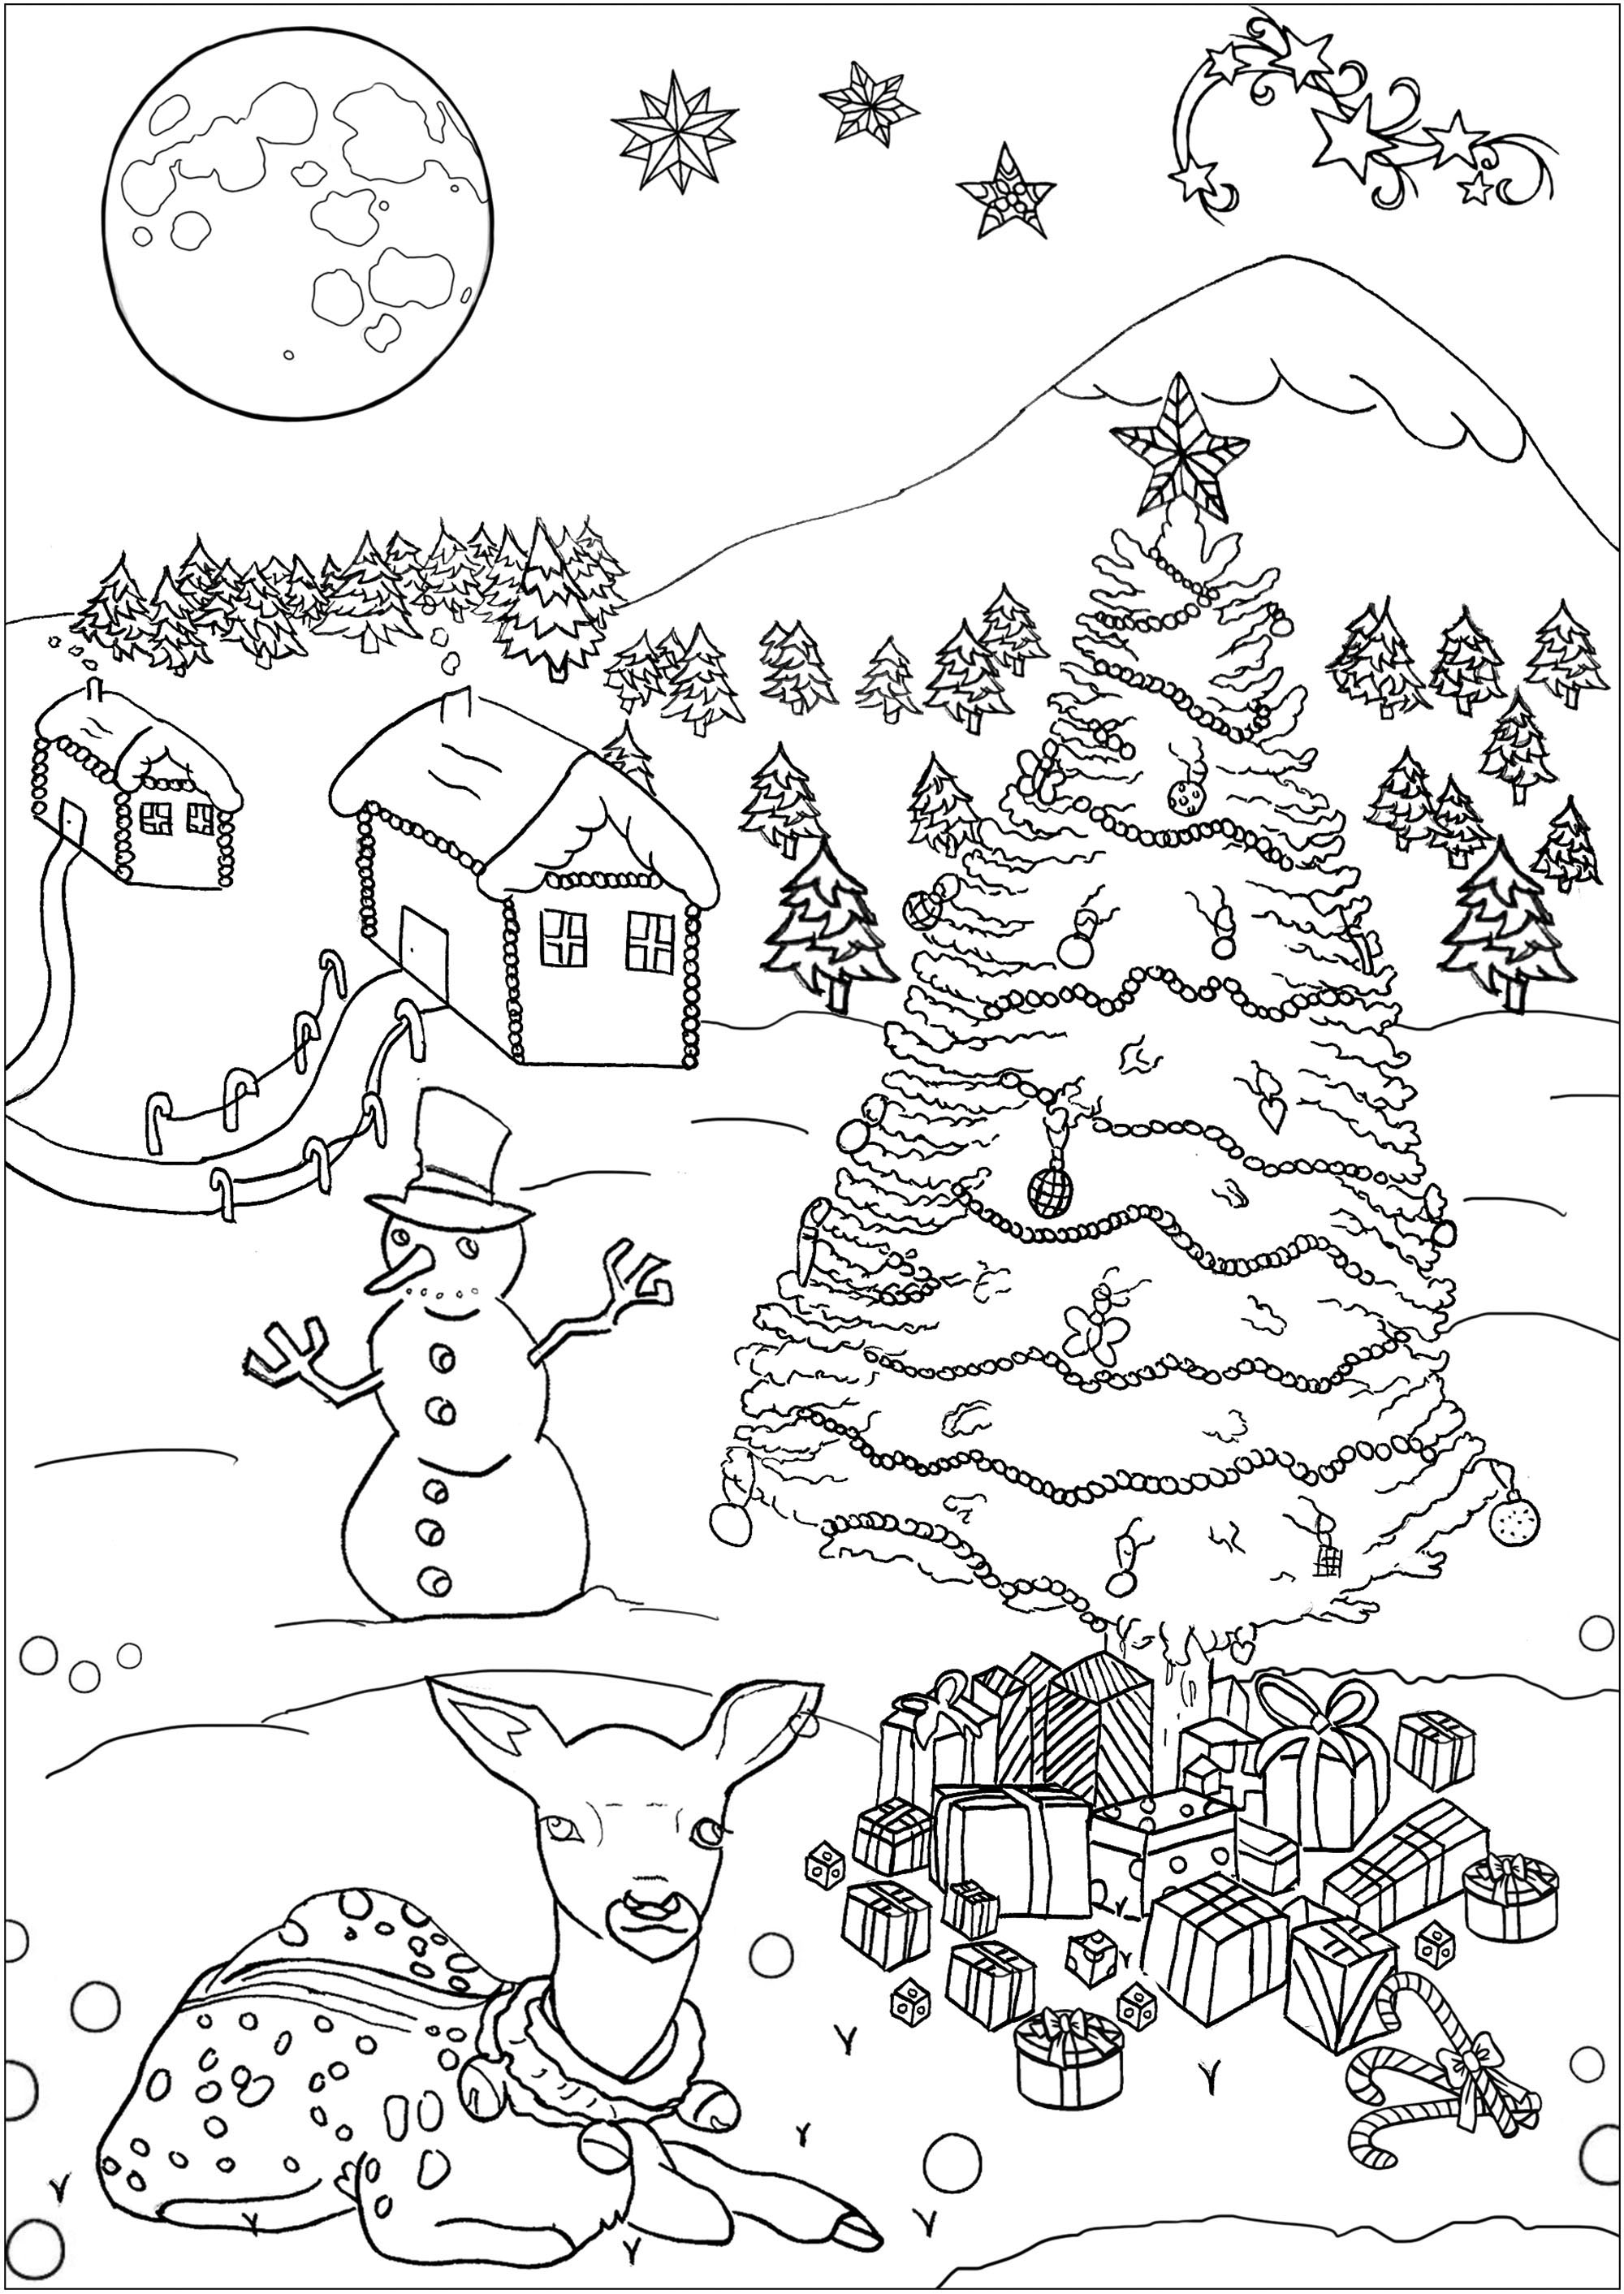 Download Christmas free to color for children - Christmas Kids ...